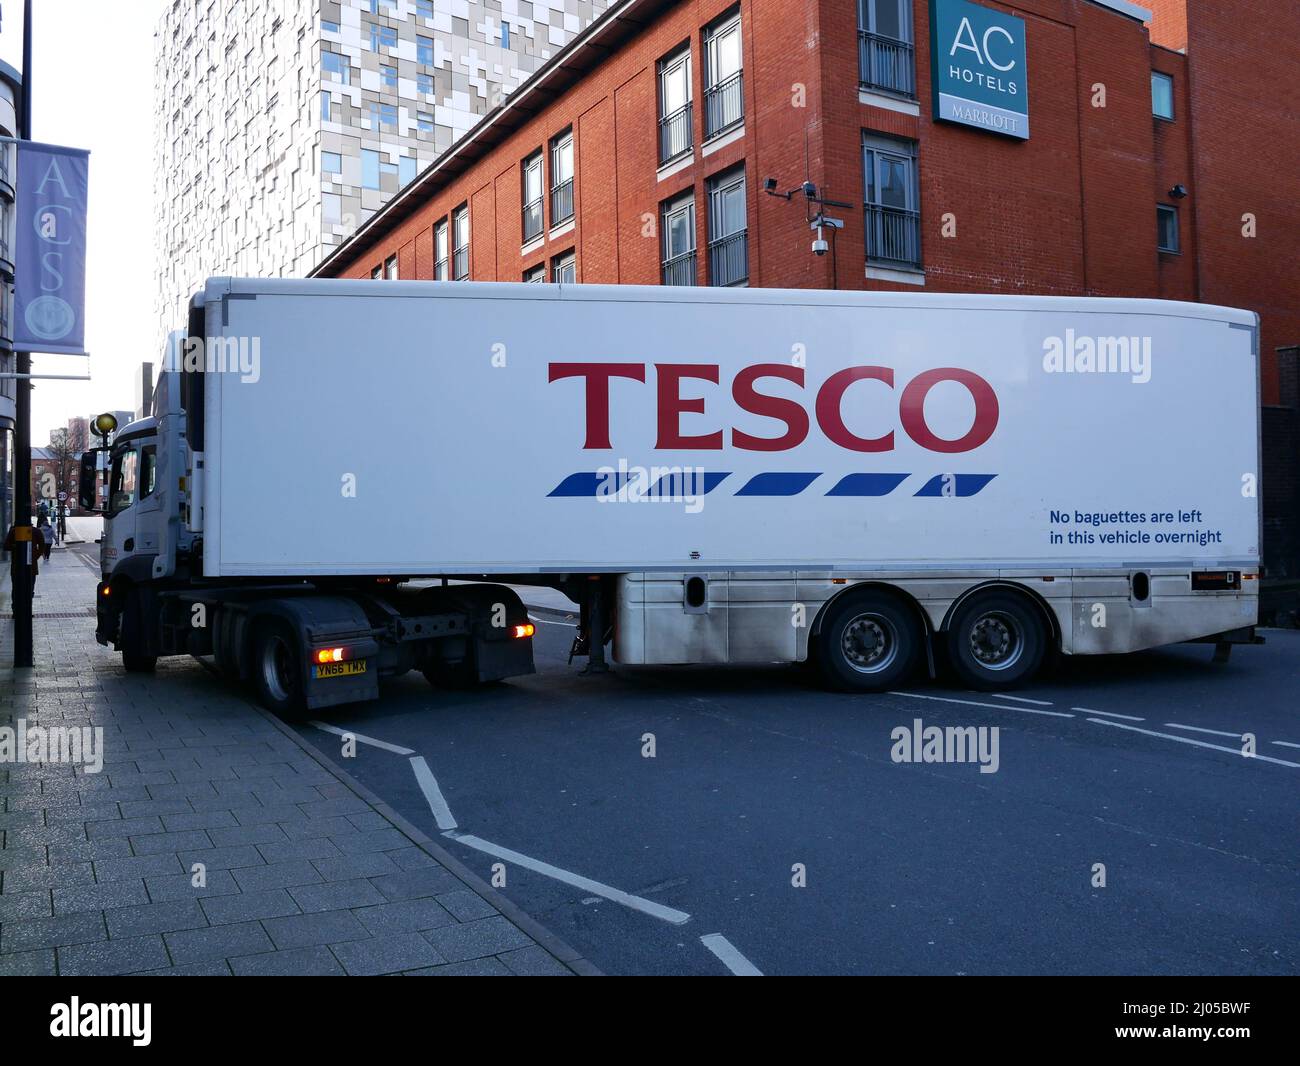 Tesco articulated lorry manoeuvering in city centre street Stock Photo